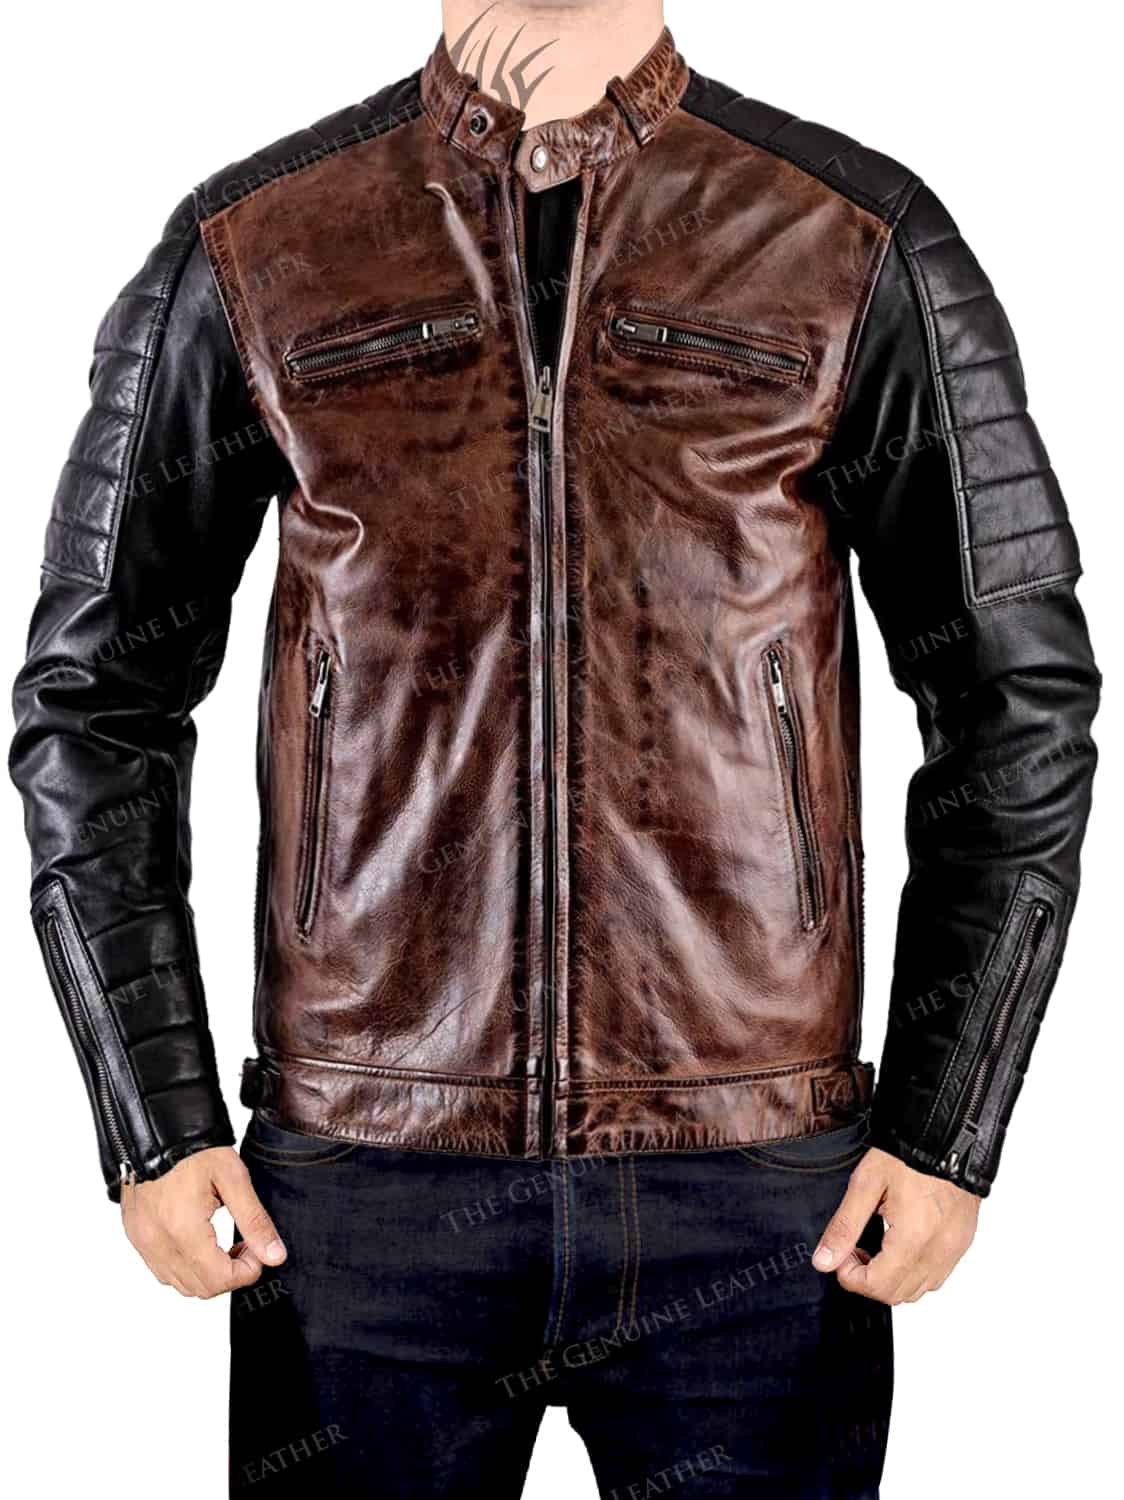 Dual color Leather Jacket